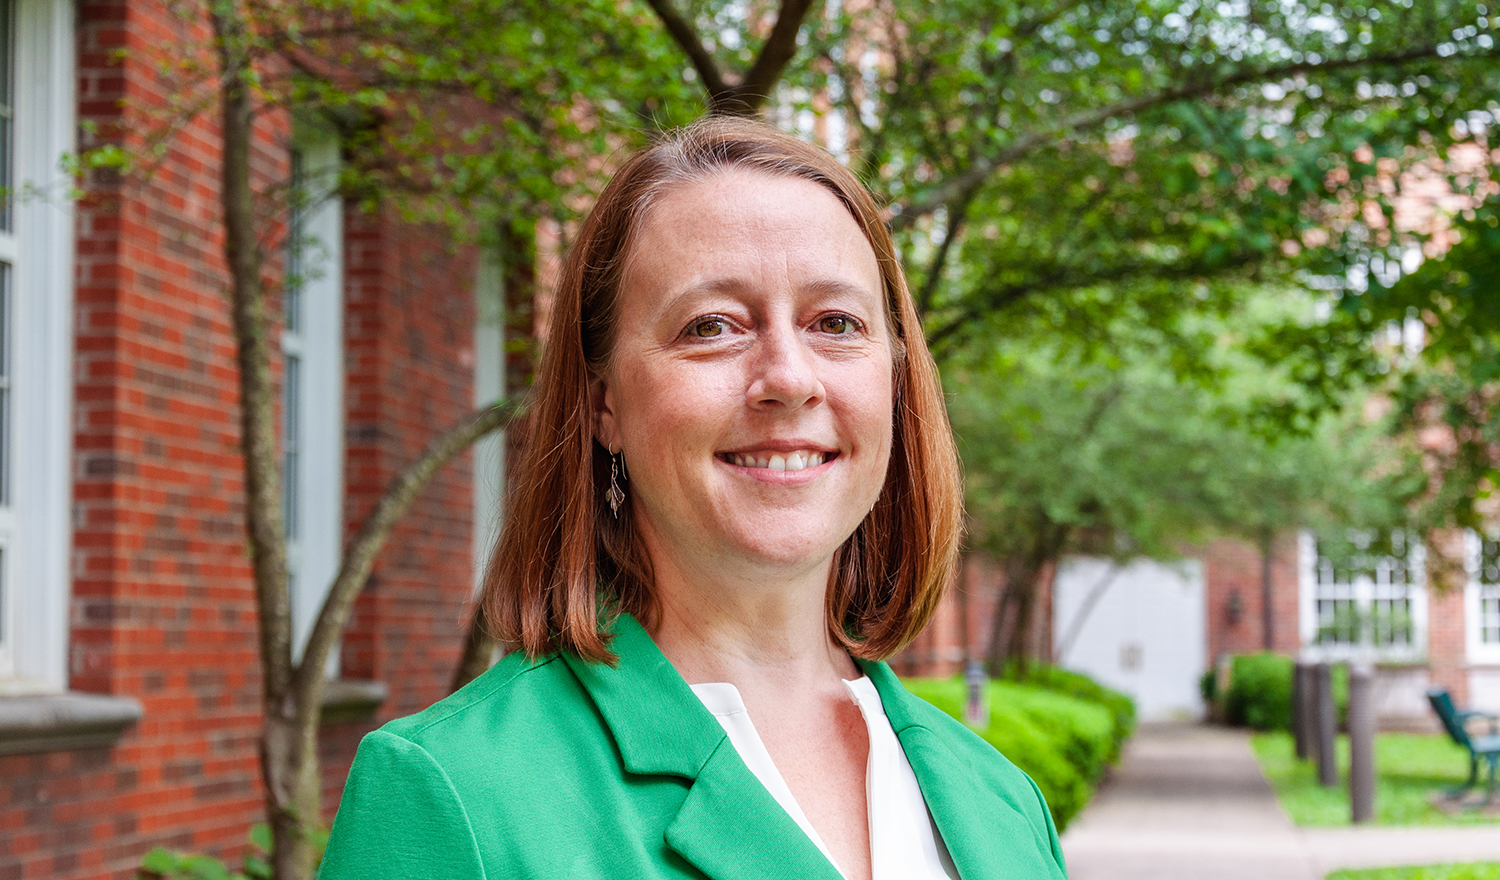 Plant scholar branches out into new role as Transylvania’s associate dean for academic affairs